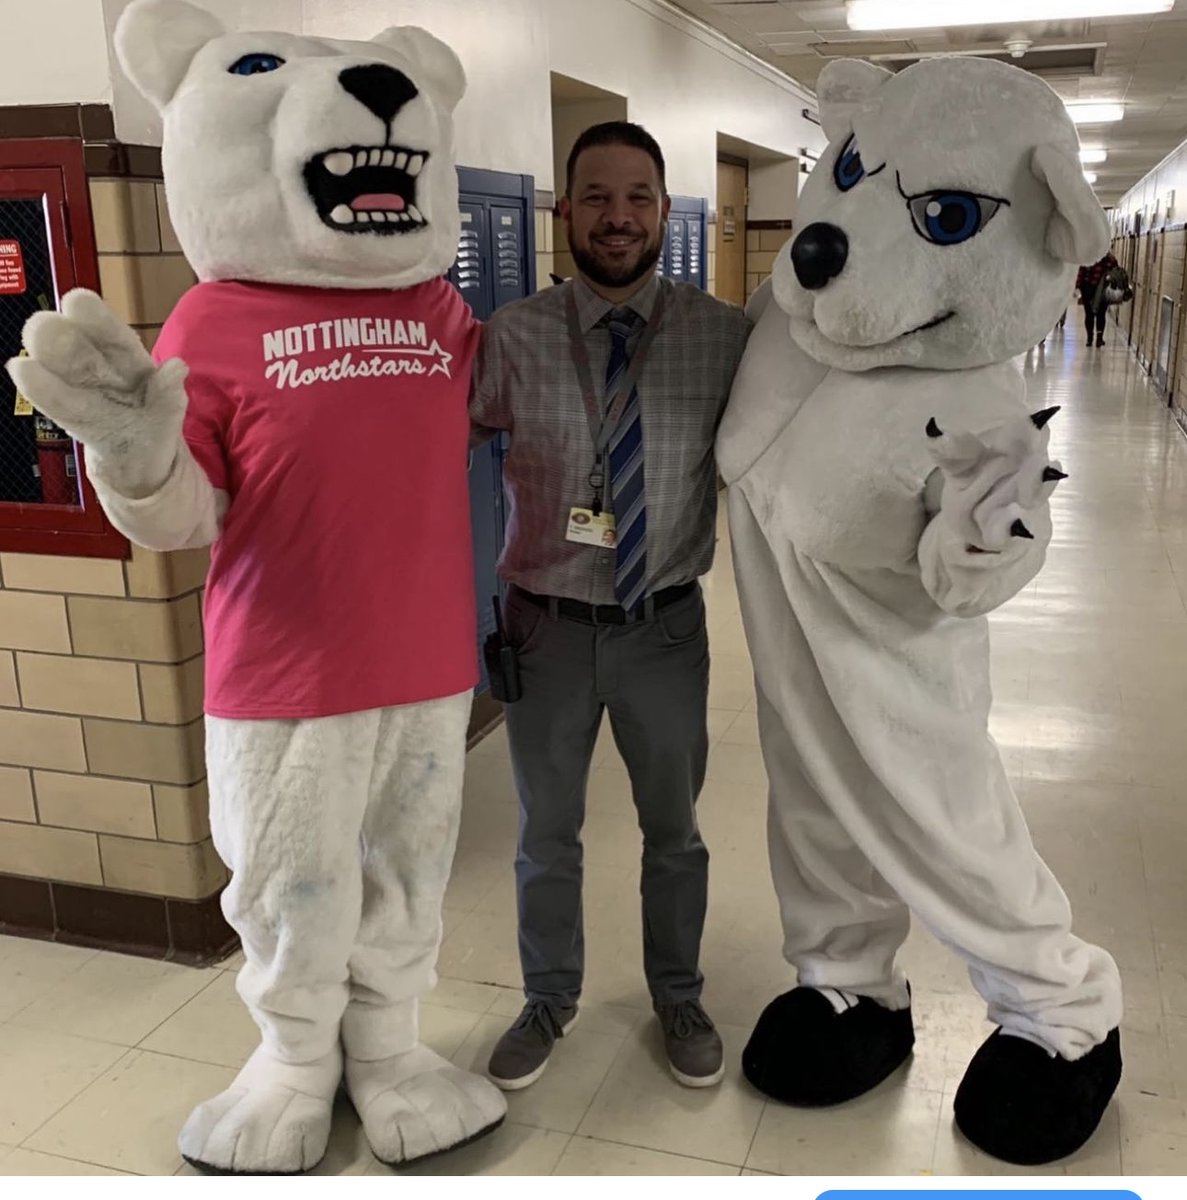 ALL OF NORTHSTAR NATION WISHES MR RAGAZZO, OUR STAR PRINCIPAL, A VERY HAPPY AND HEALTHY BIRTHDAY! 💙💛 WE APPRECIATE YOU AND ALL YOU DO FOR OUR STUDENTS, SCHOOL, STAFF AND COMMUNITY!!